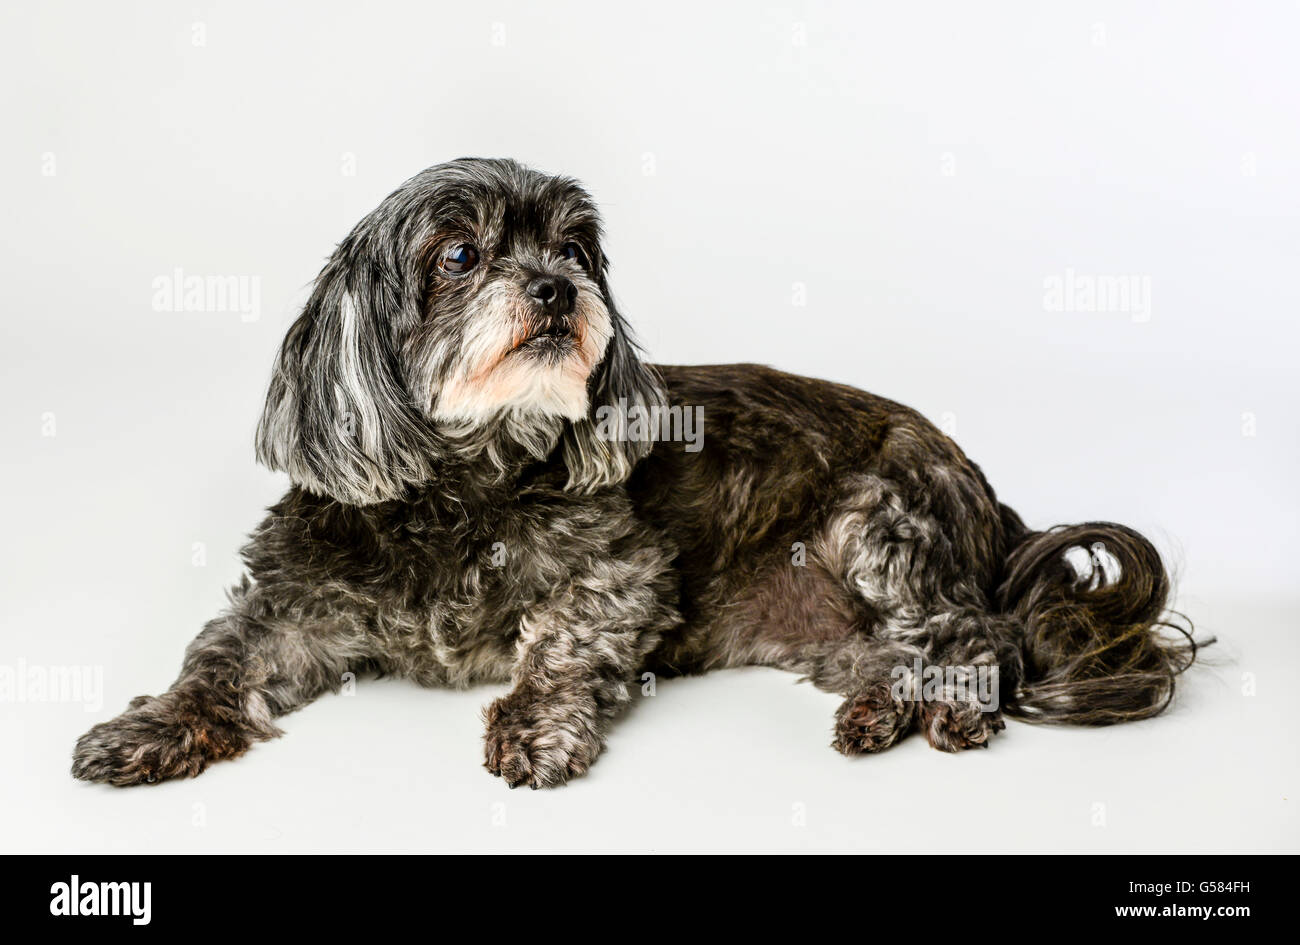 An adorable dark tri-colored mixed breed small dog reclining with noble expression on white background Stock Photo